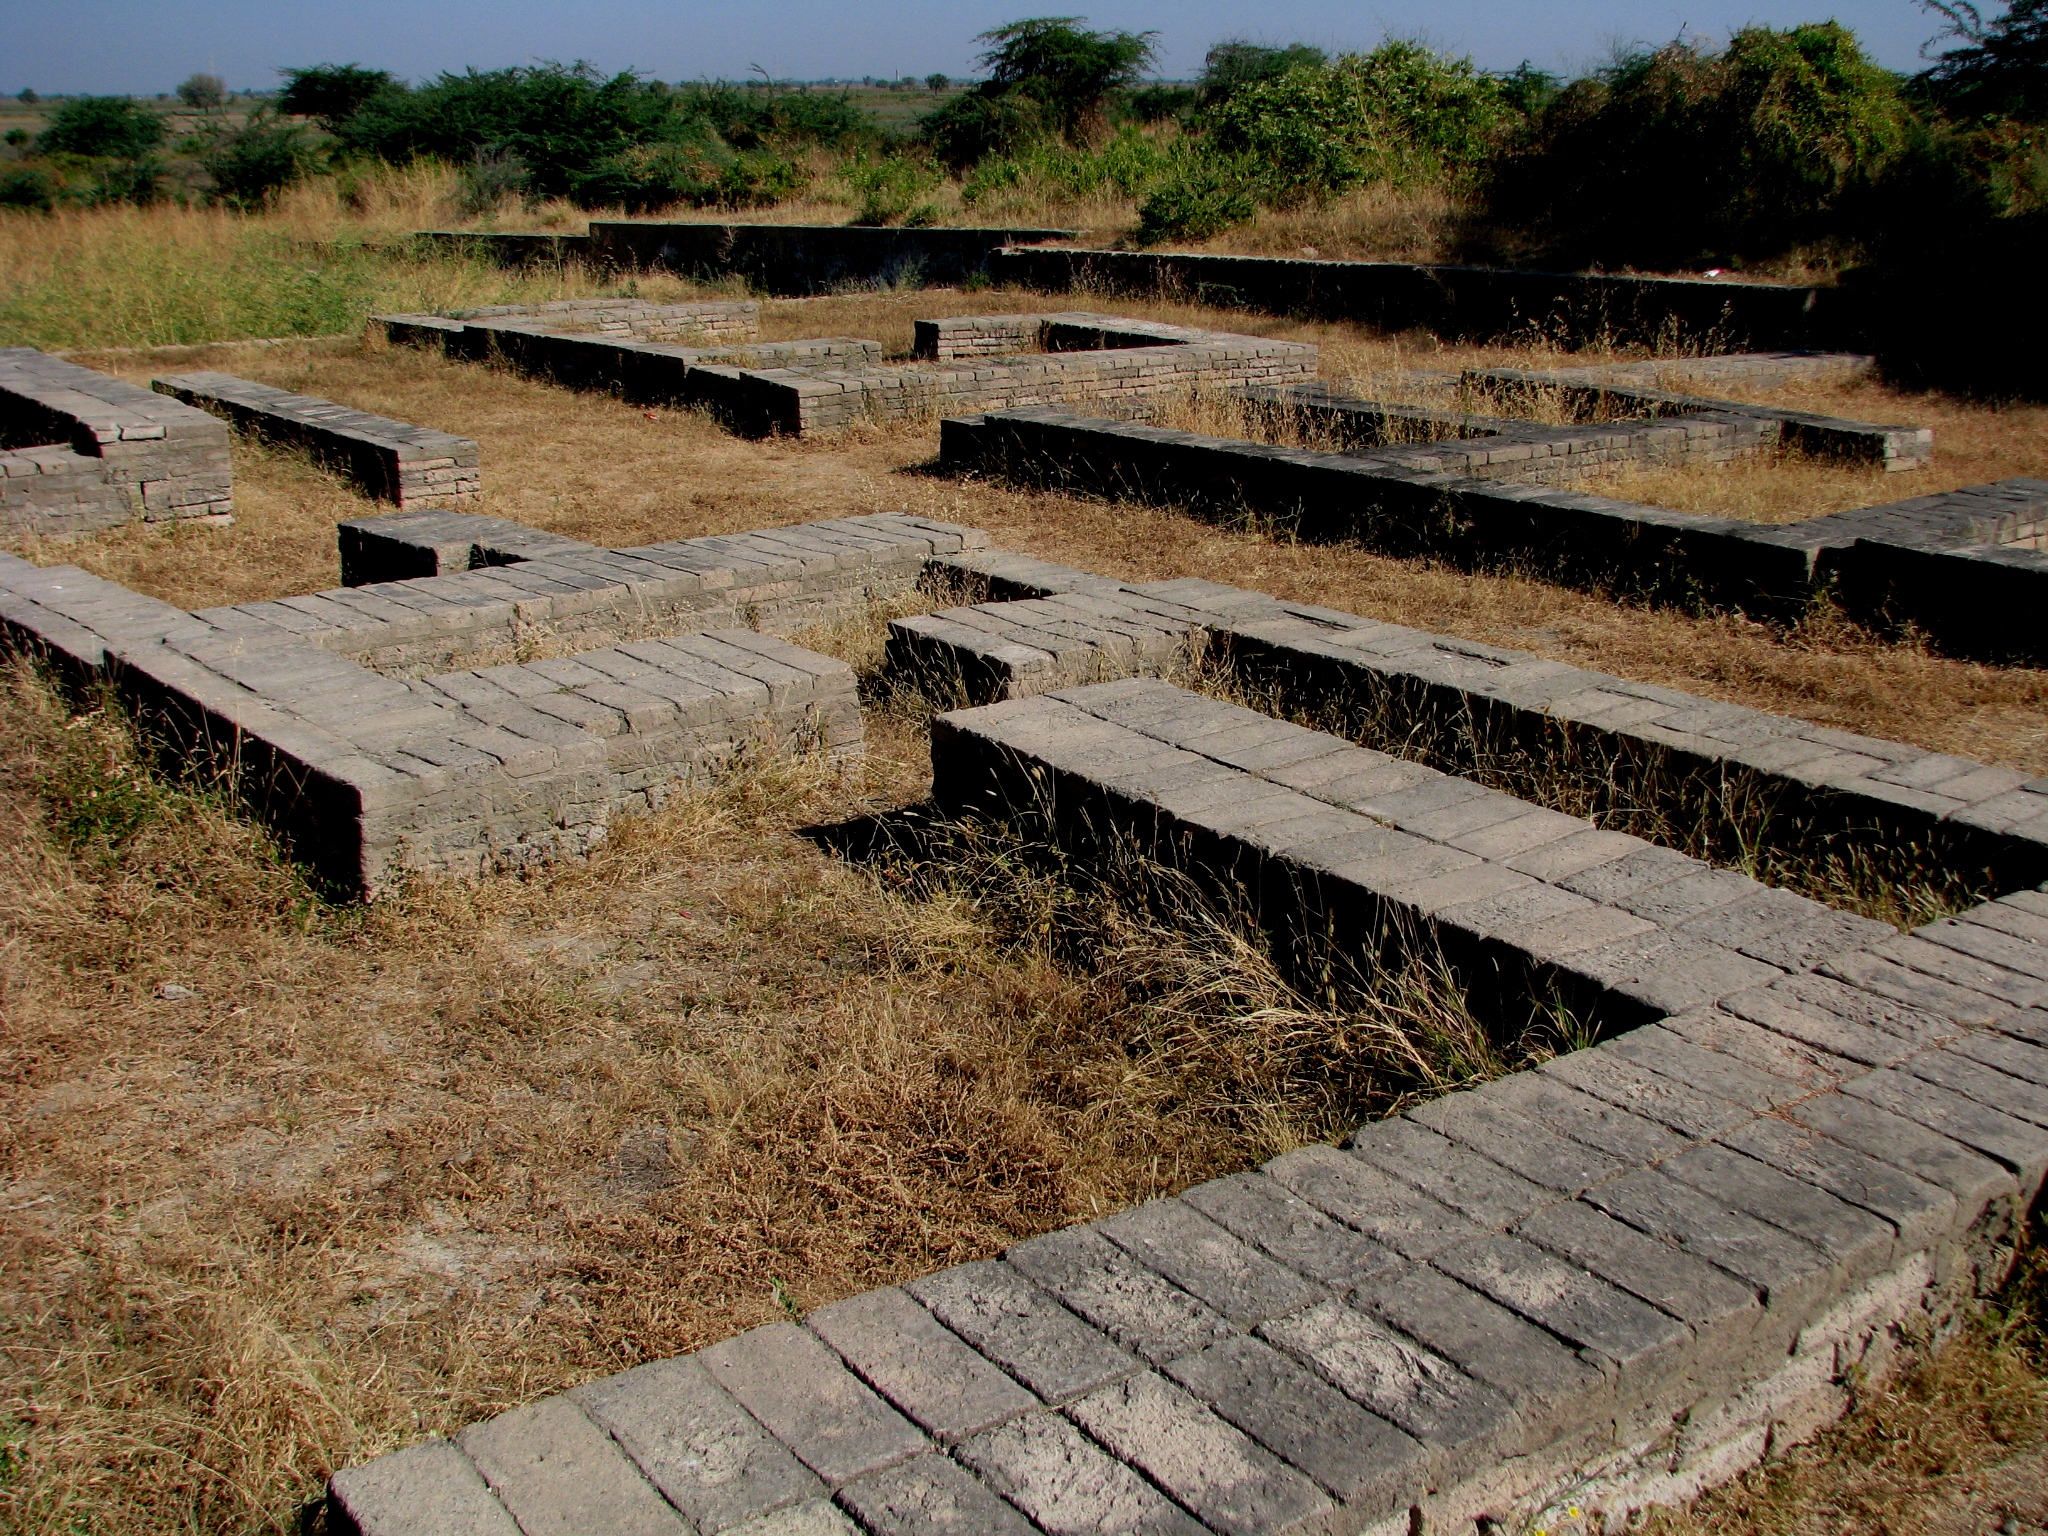 Archaeological remains at Lower town of Lothal